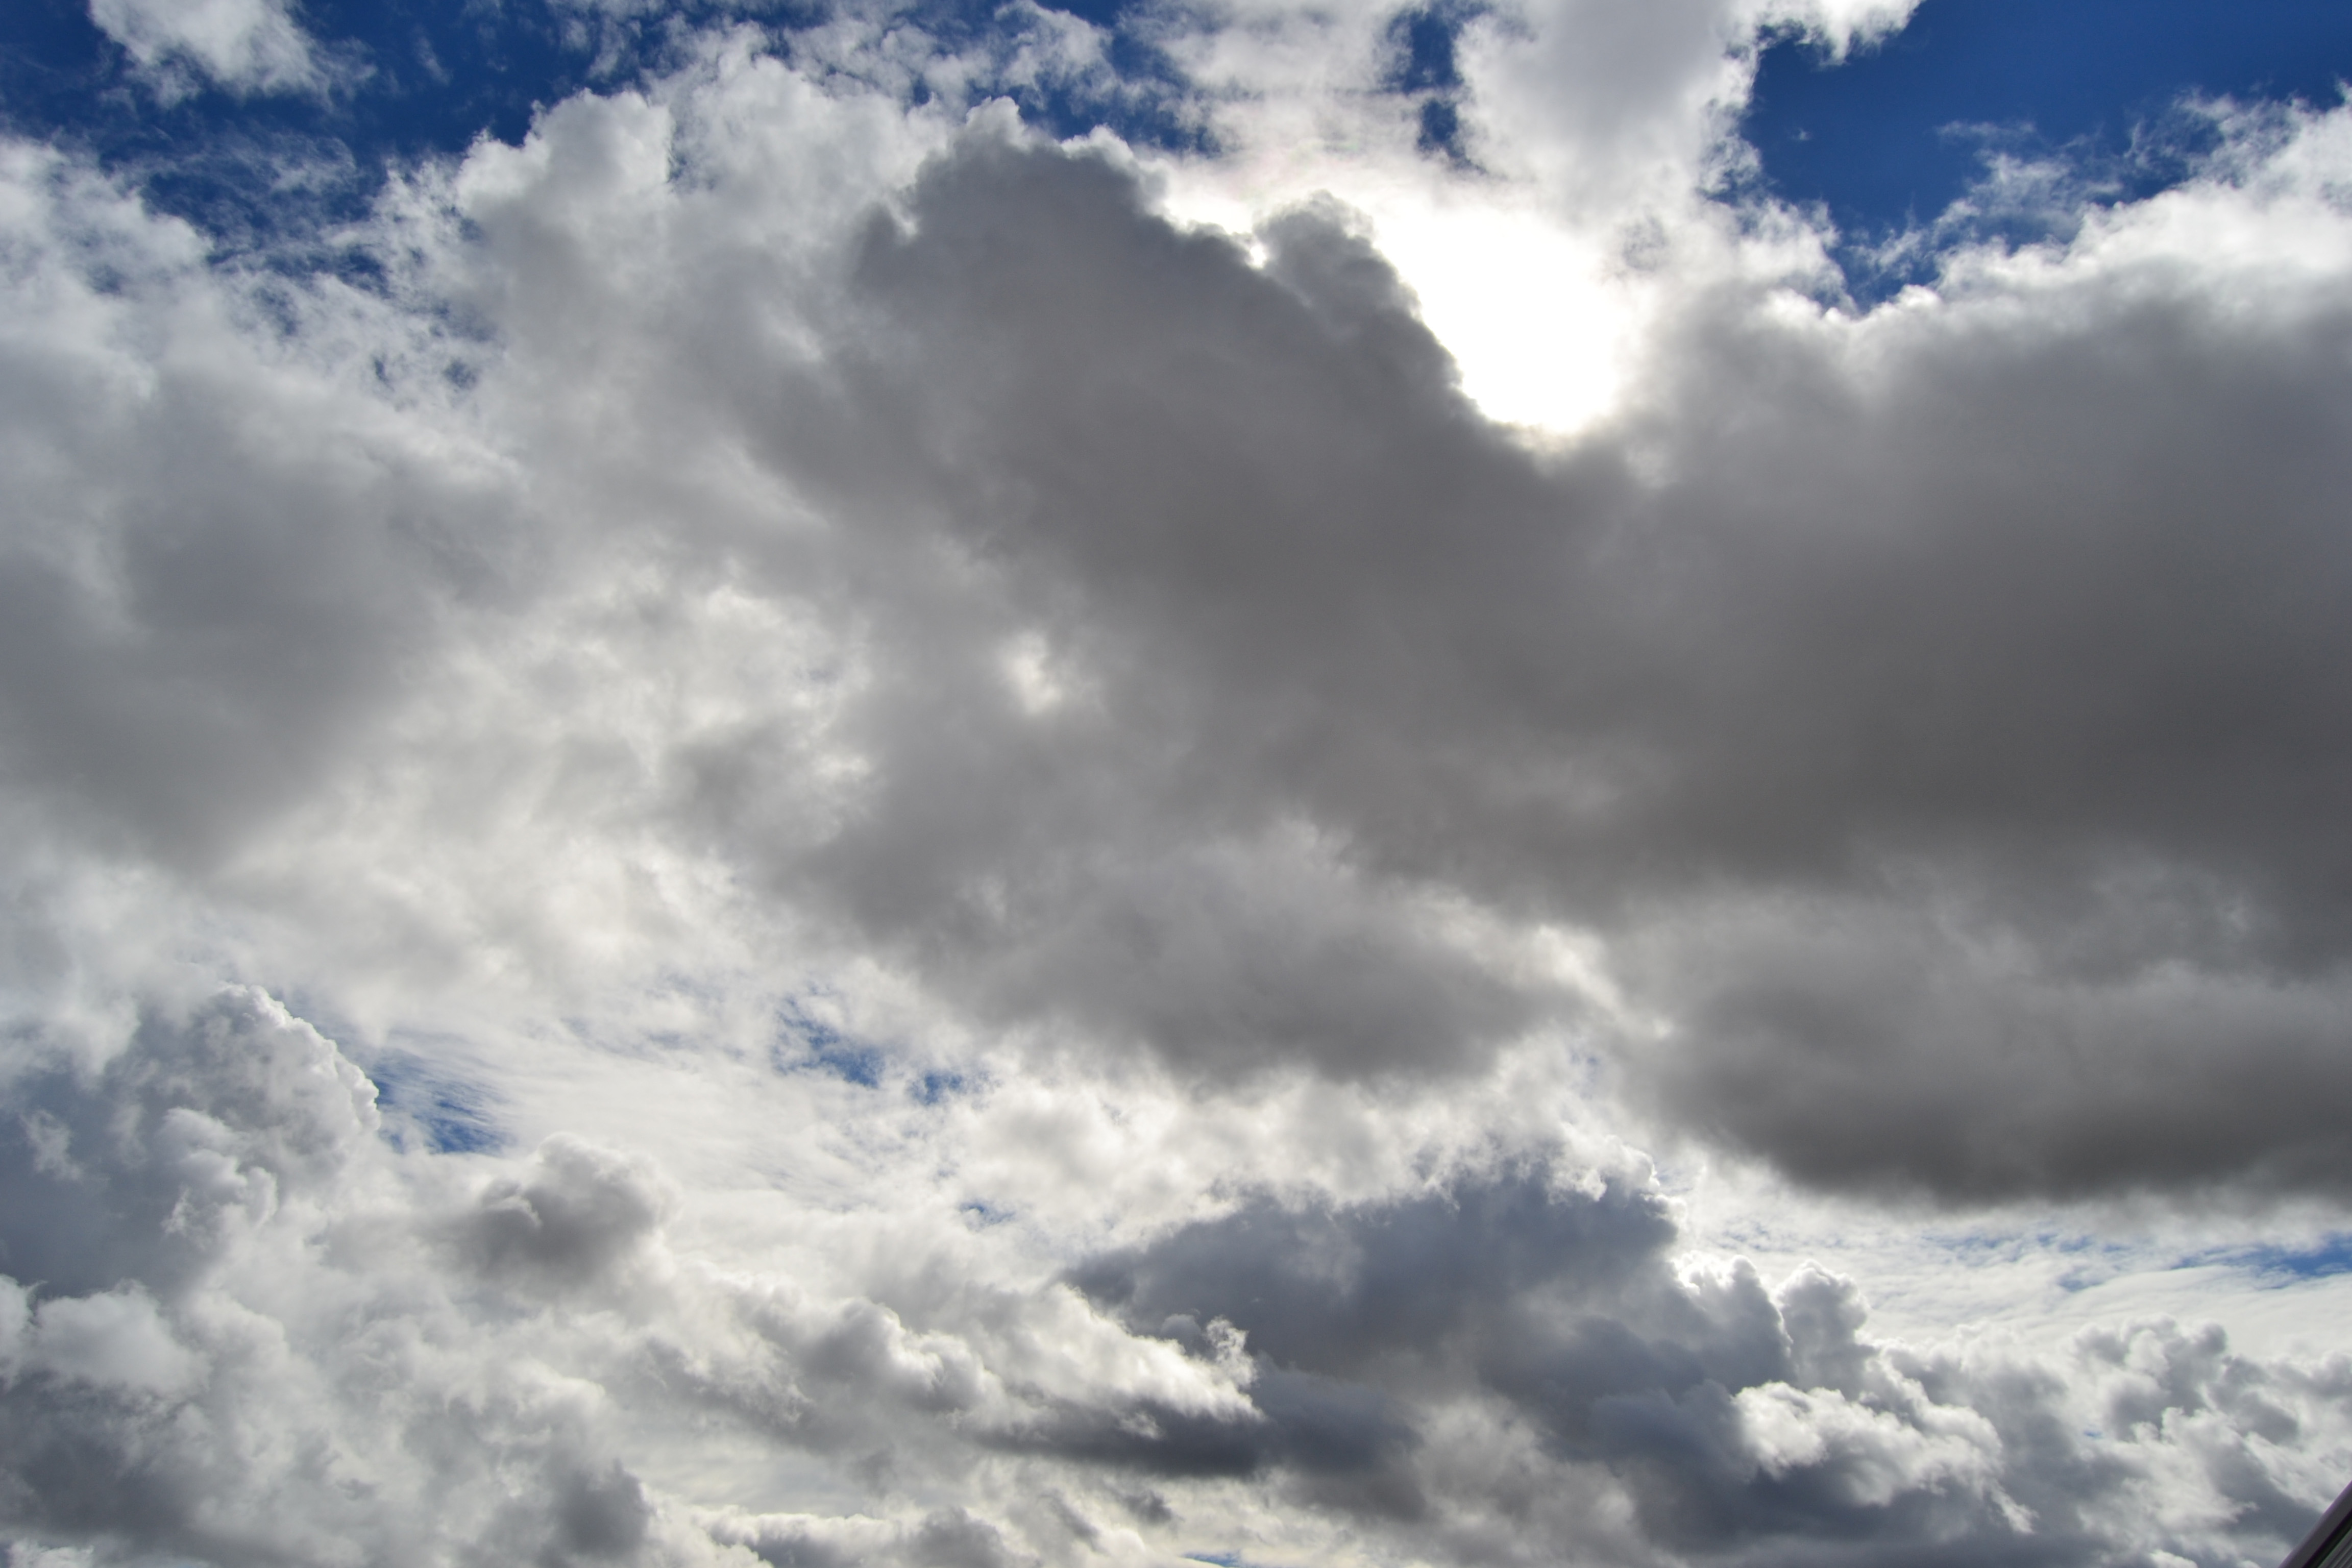 Calling All Cloud-Loving Citizen Scientists : Image of the Day